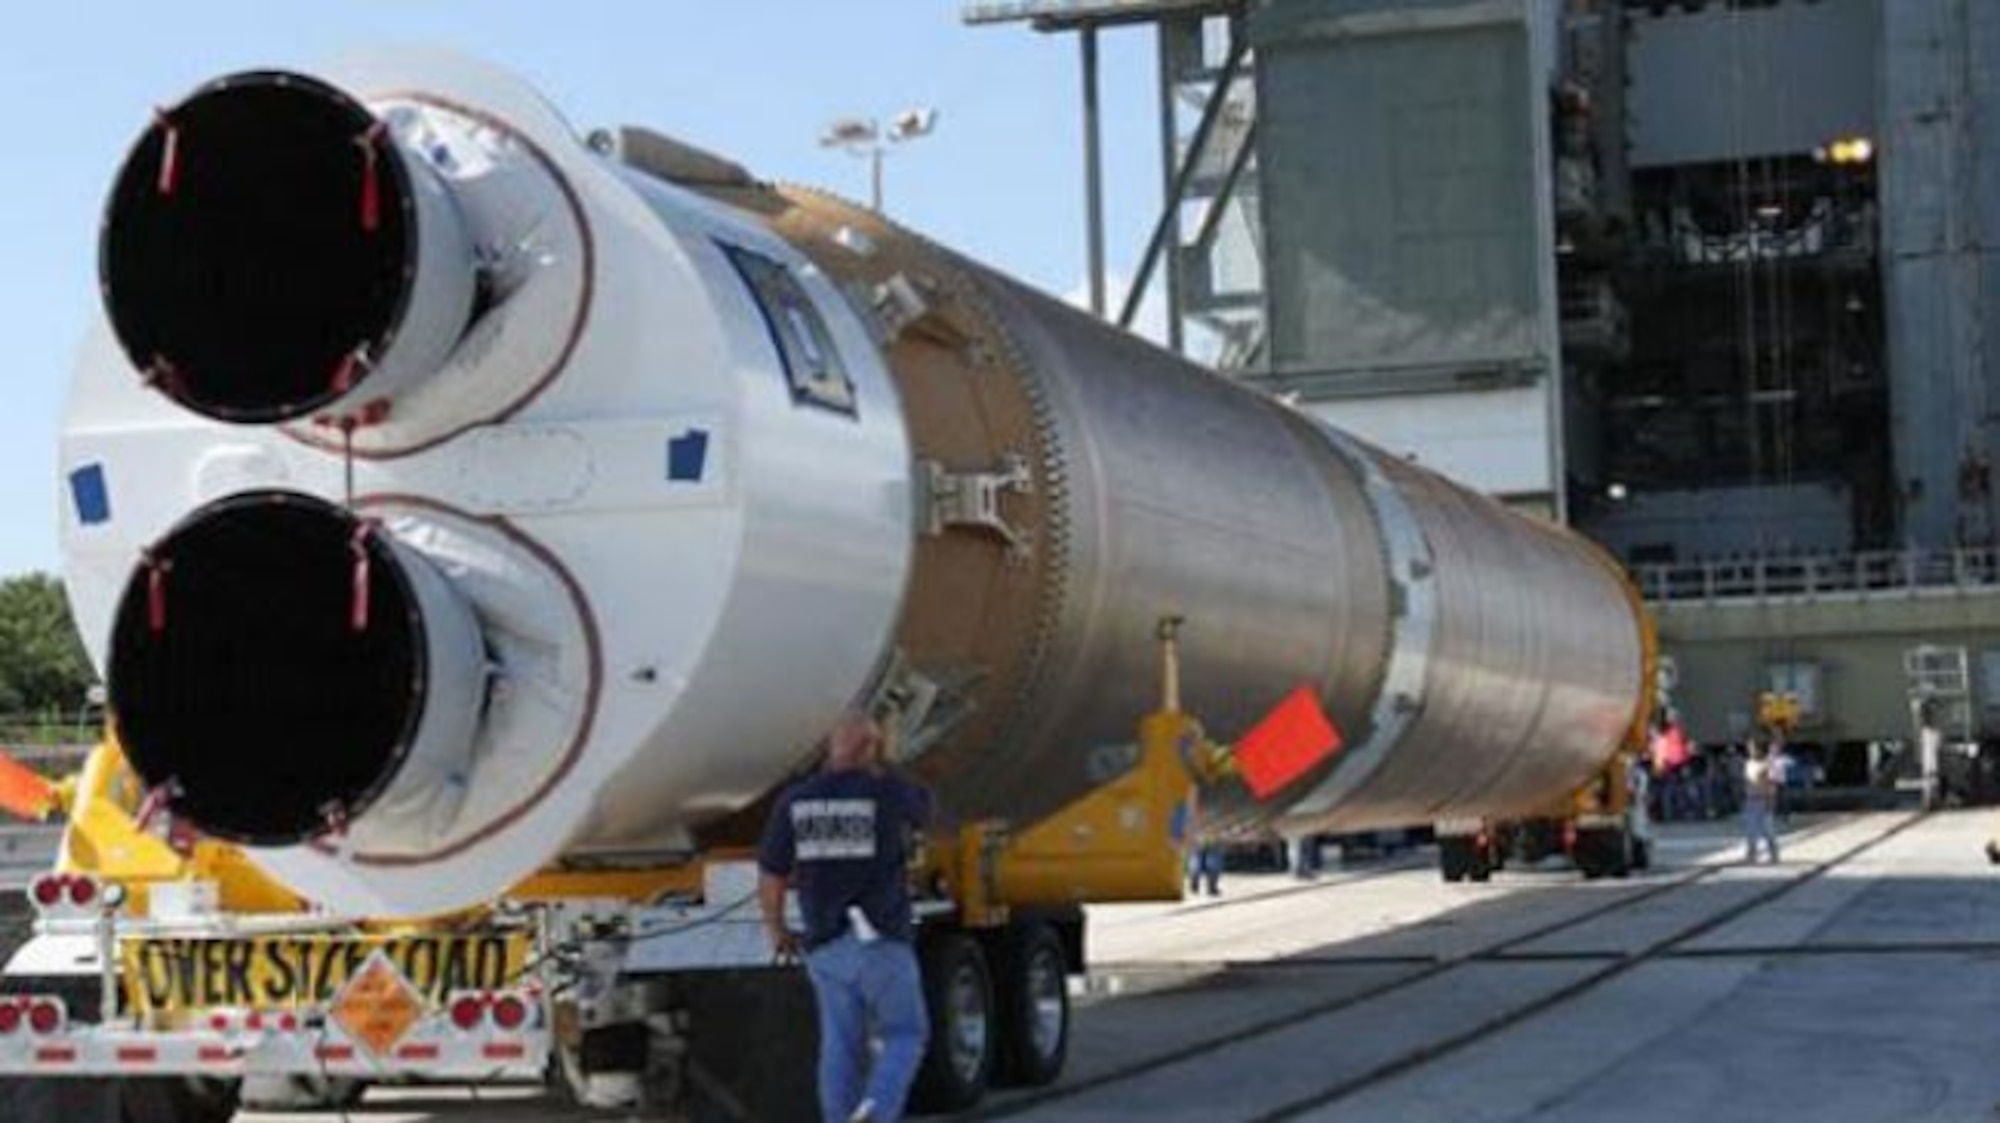 A United Launch Alliance Atlas V space launch vehicle featuring the Russian made RD-180 propulsion system awaits to be stacked at Space Launch Complex 41 at Cape Canaveral Air Force Station, Fla. BAA awards are part of a comprehensive Air Force plan to transition off the Russian made RD-180 propulsion system by investing in industry launch solutions with the ultimate goal to competitively procure launch services in a robust domestic launch market. (U.S. Air Force Photo) 
